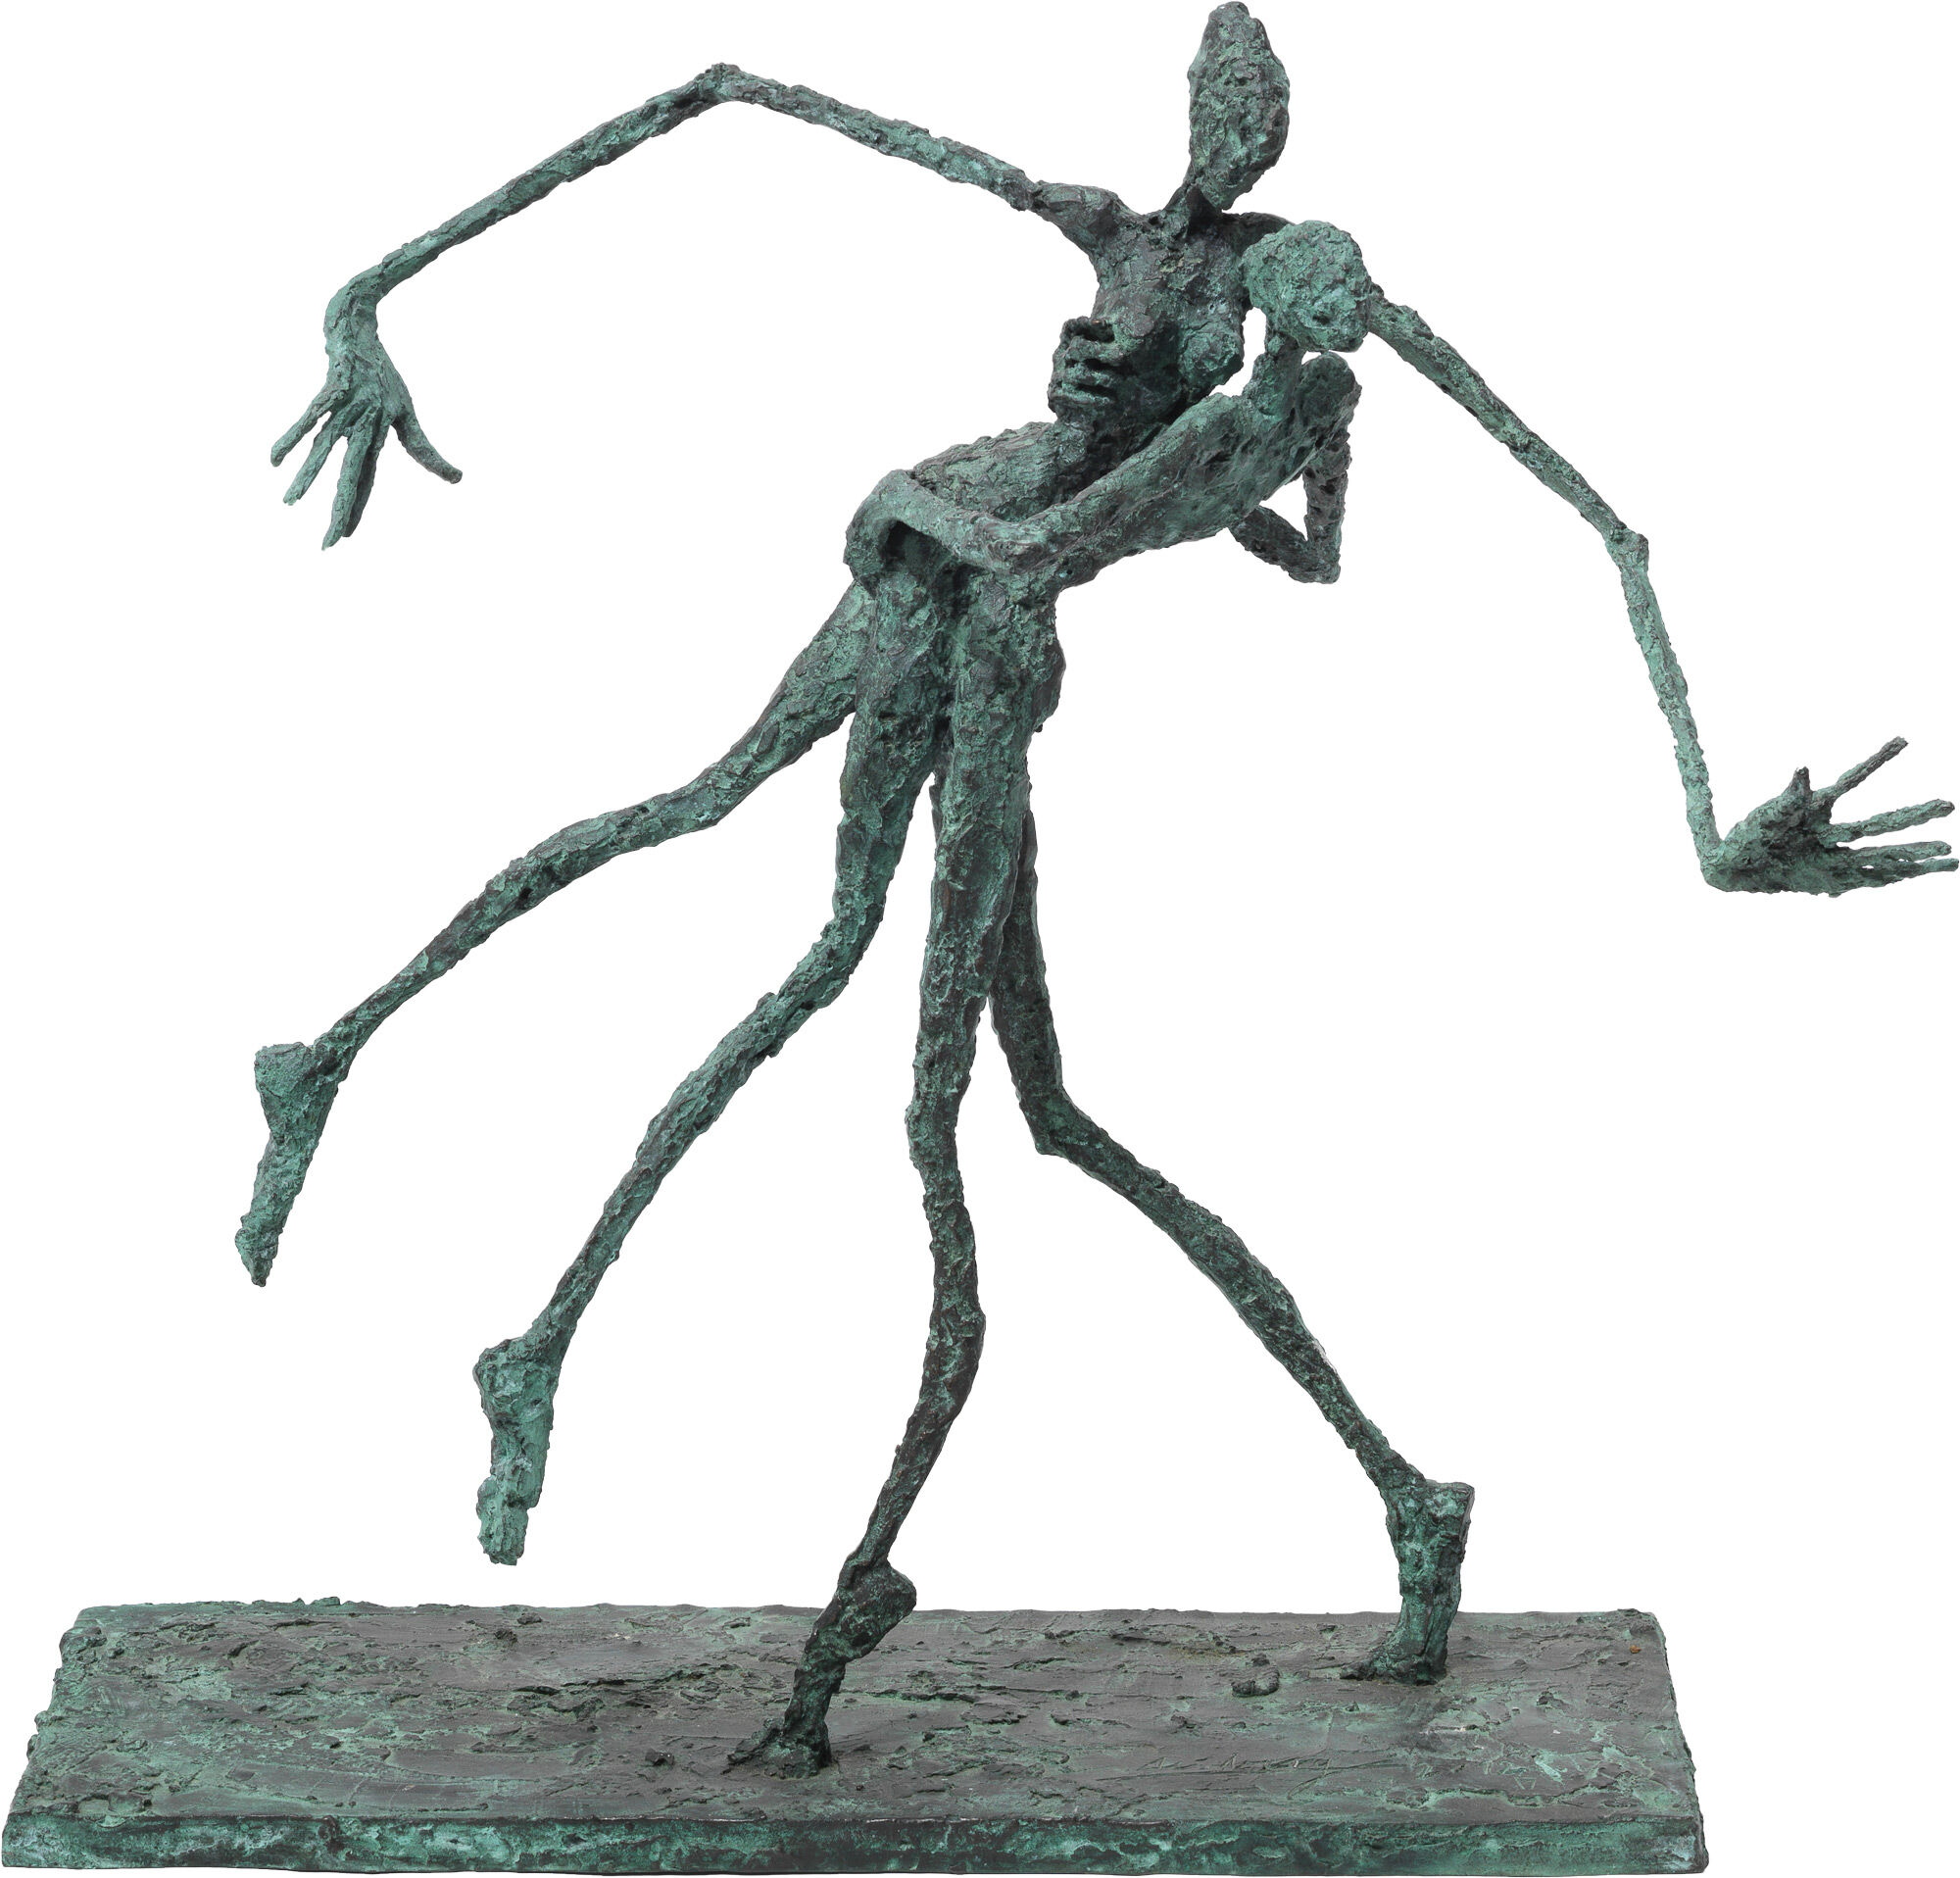 Sculpture "Passion" (2012), bronze by Helge Leiberg